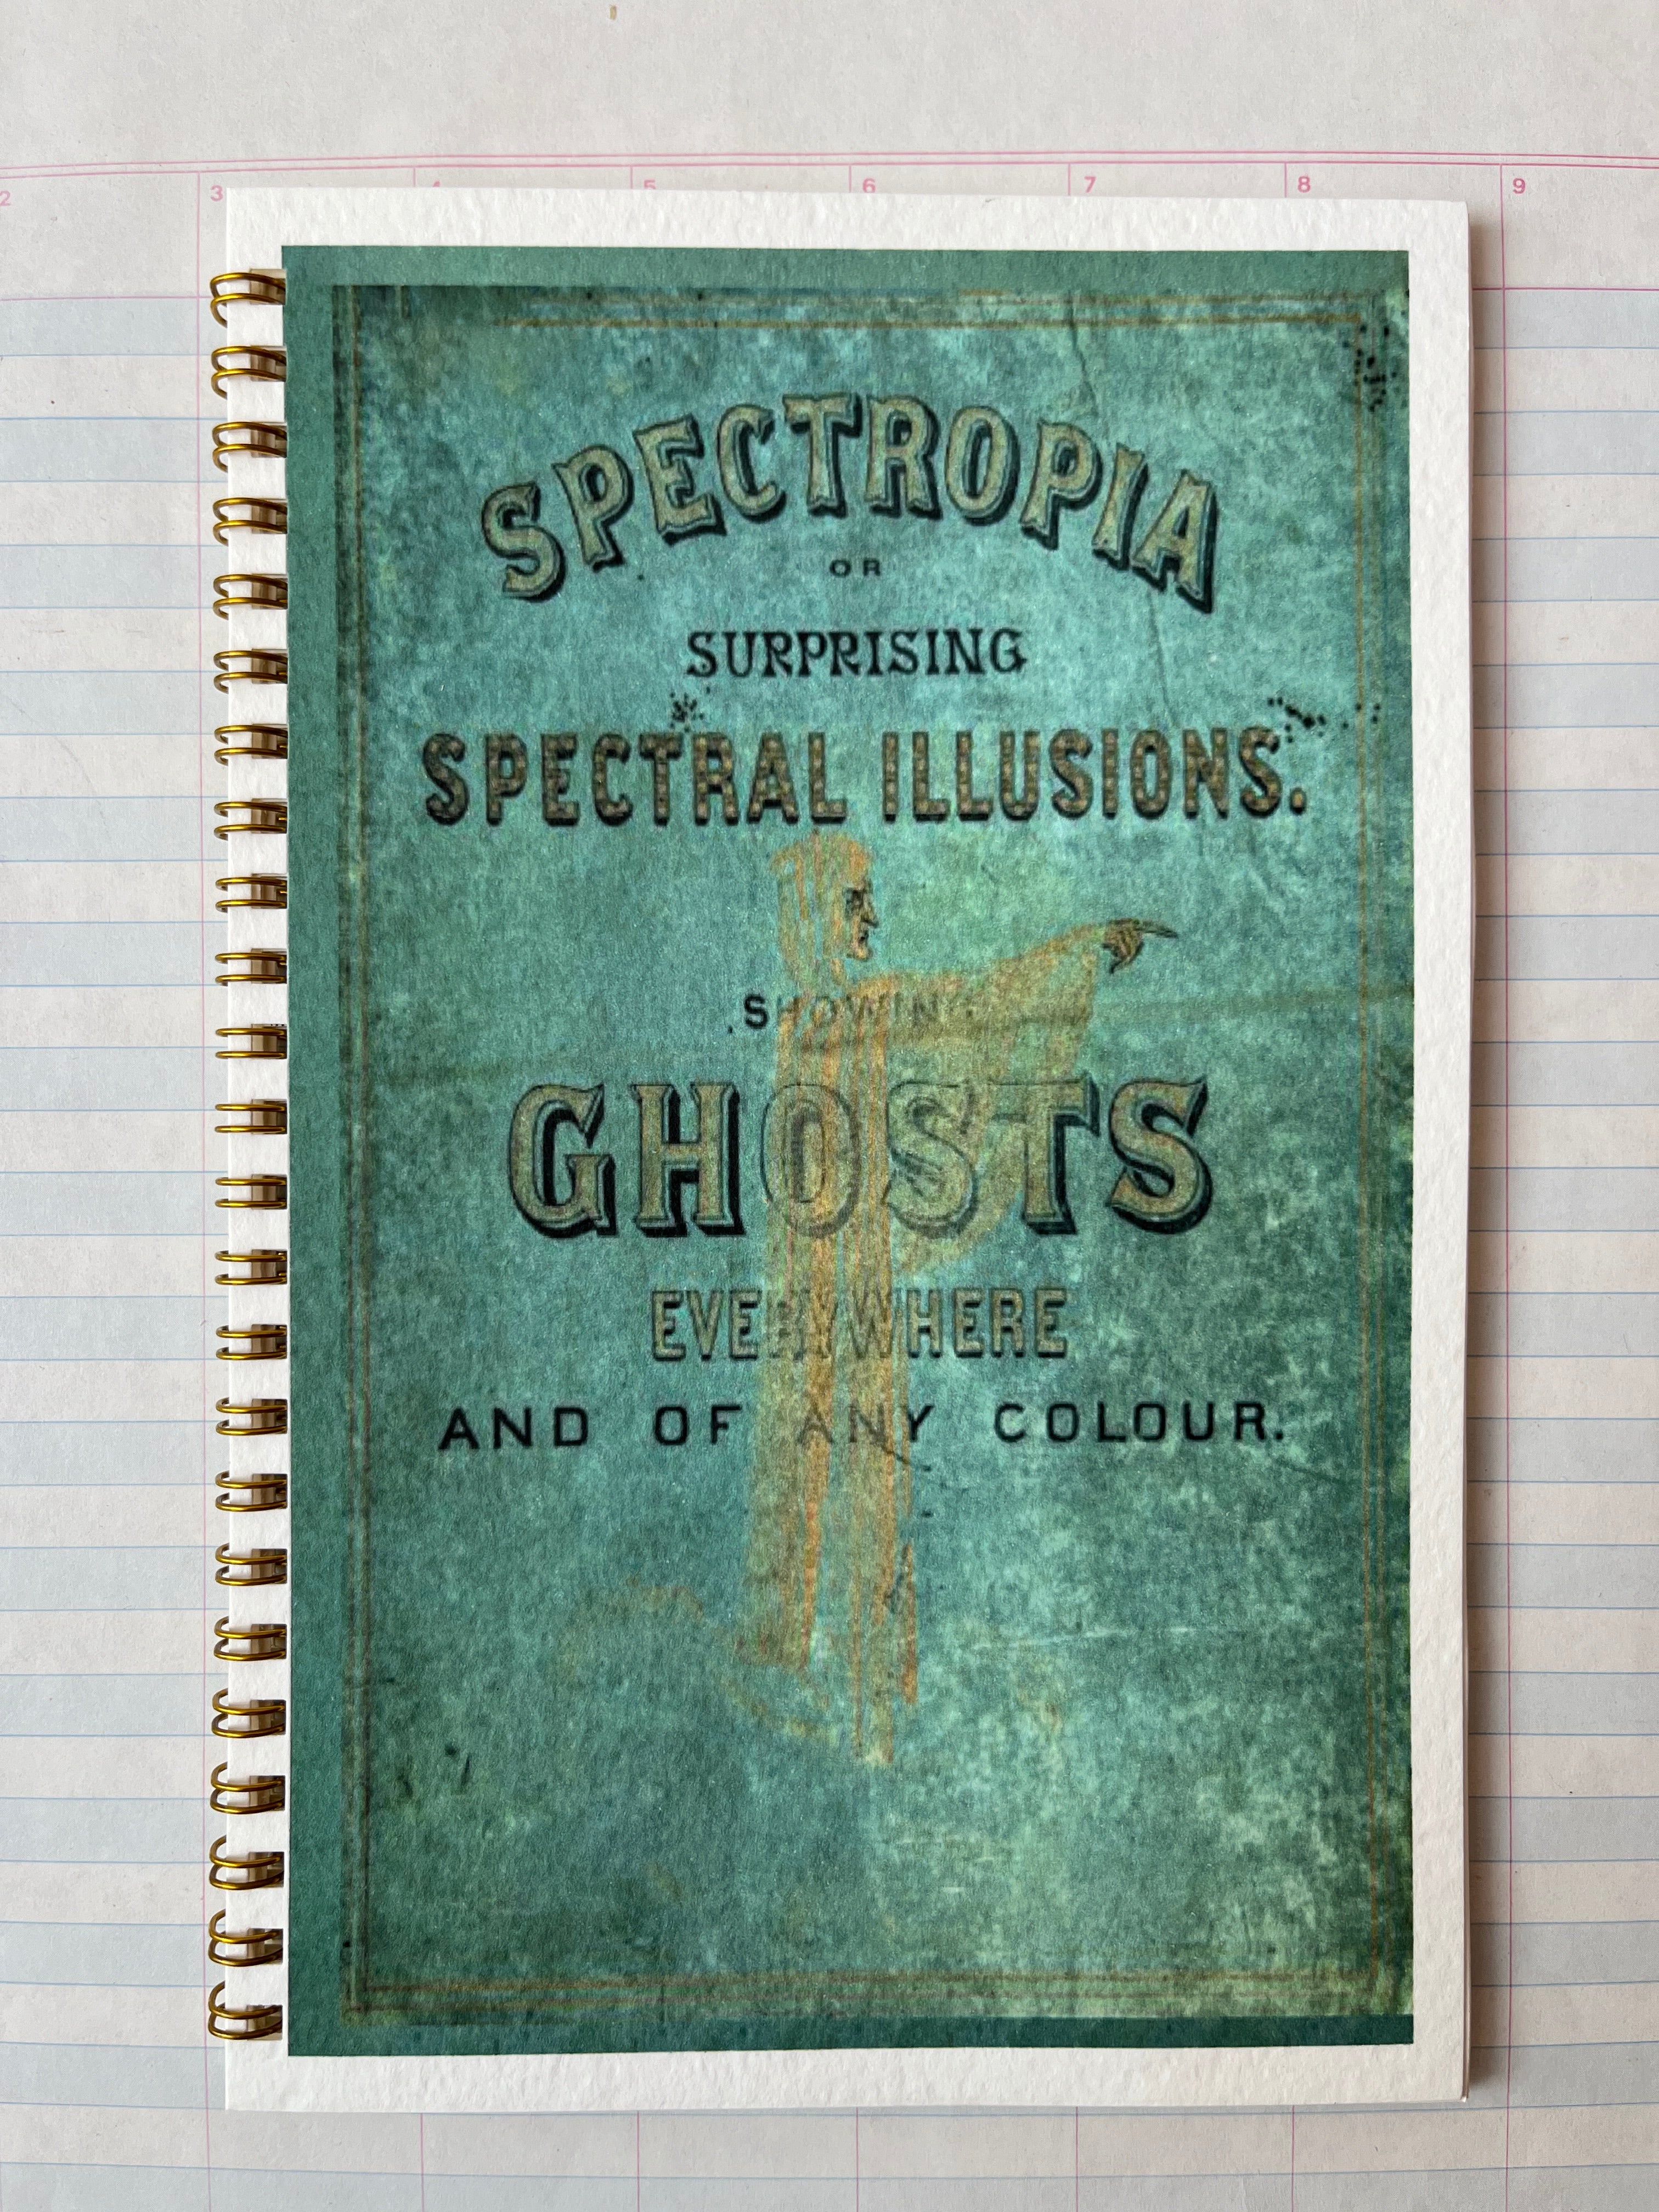 Spectropia, Spectral Illusions and Ghosts